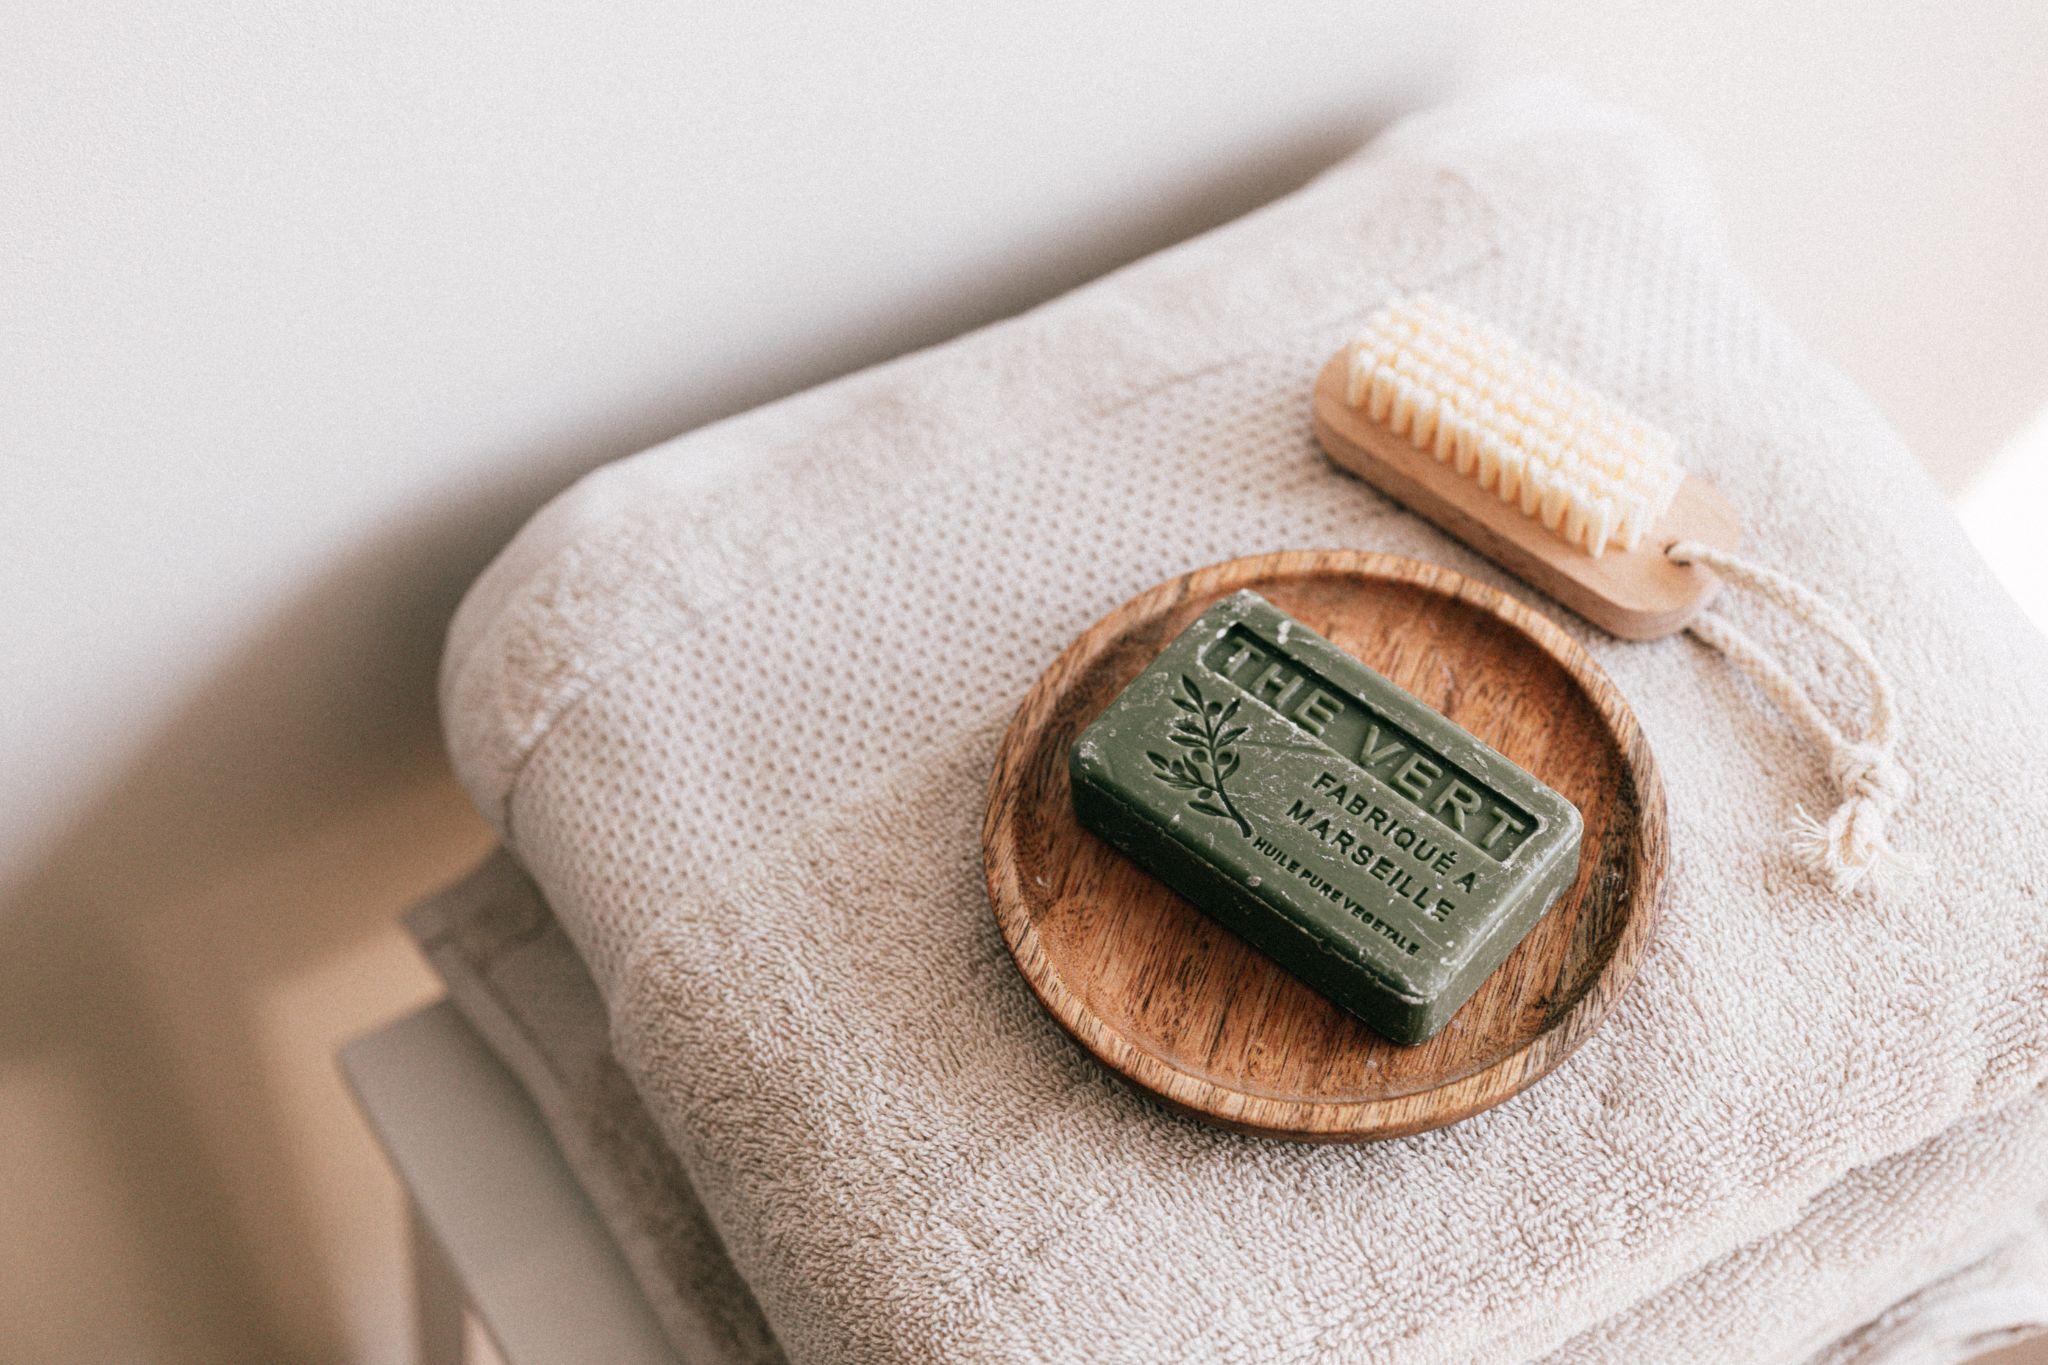 Cruelty-Free Skincare: Handmade soap and a wooden-handled brush on a folded towel